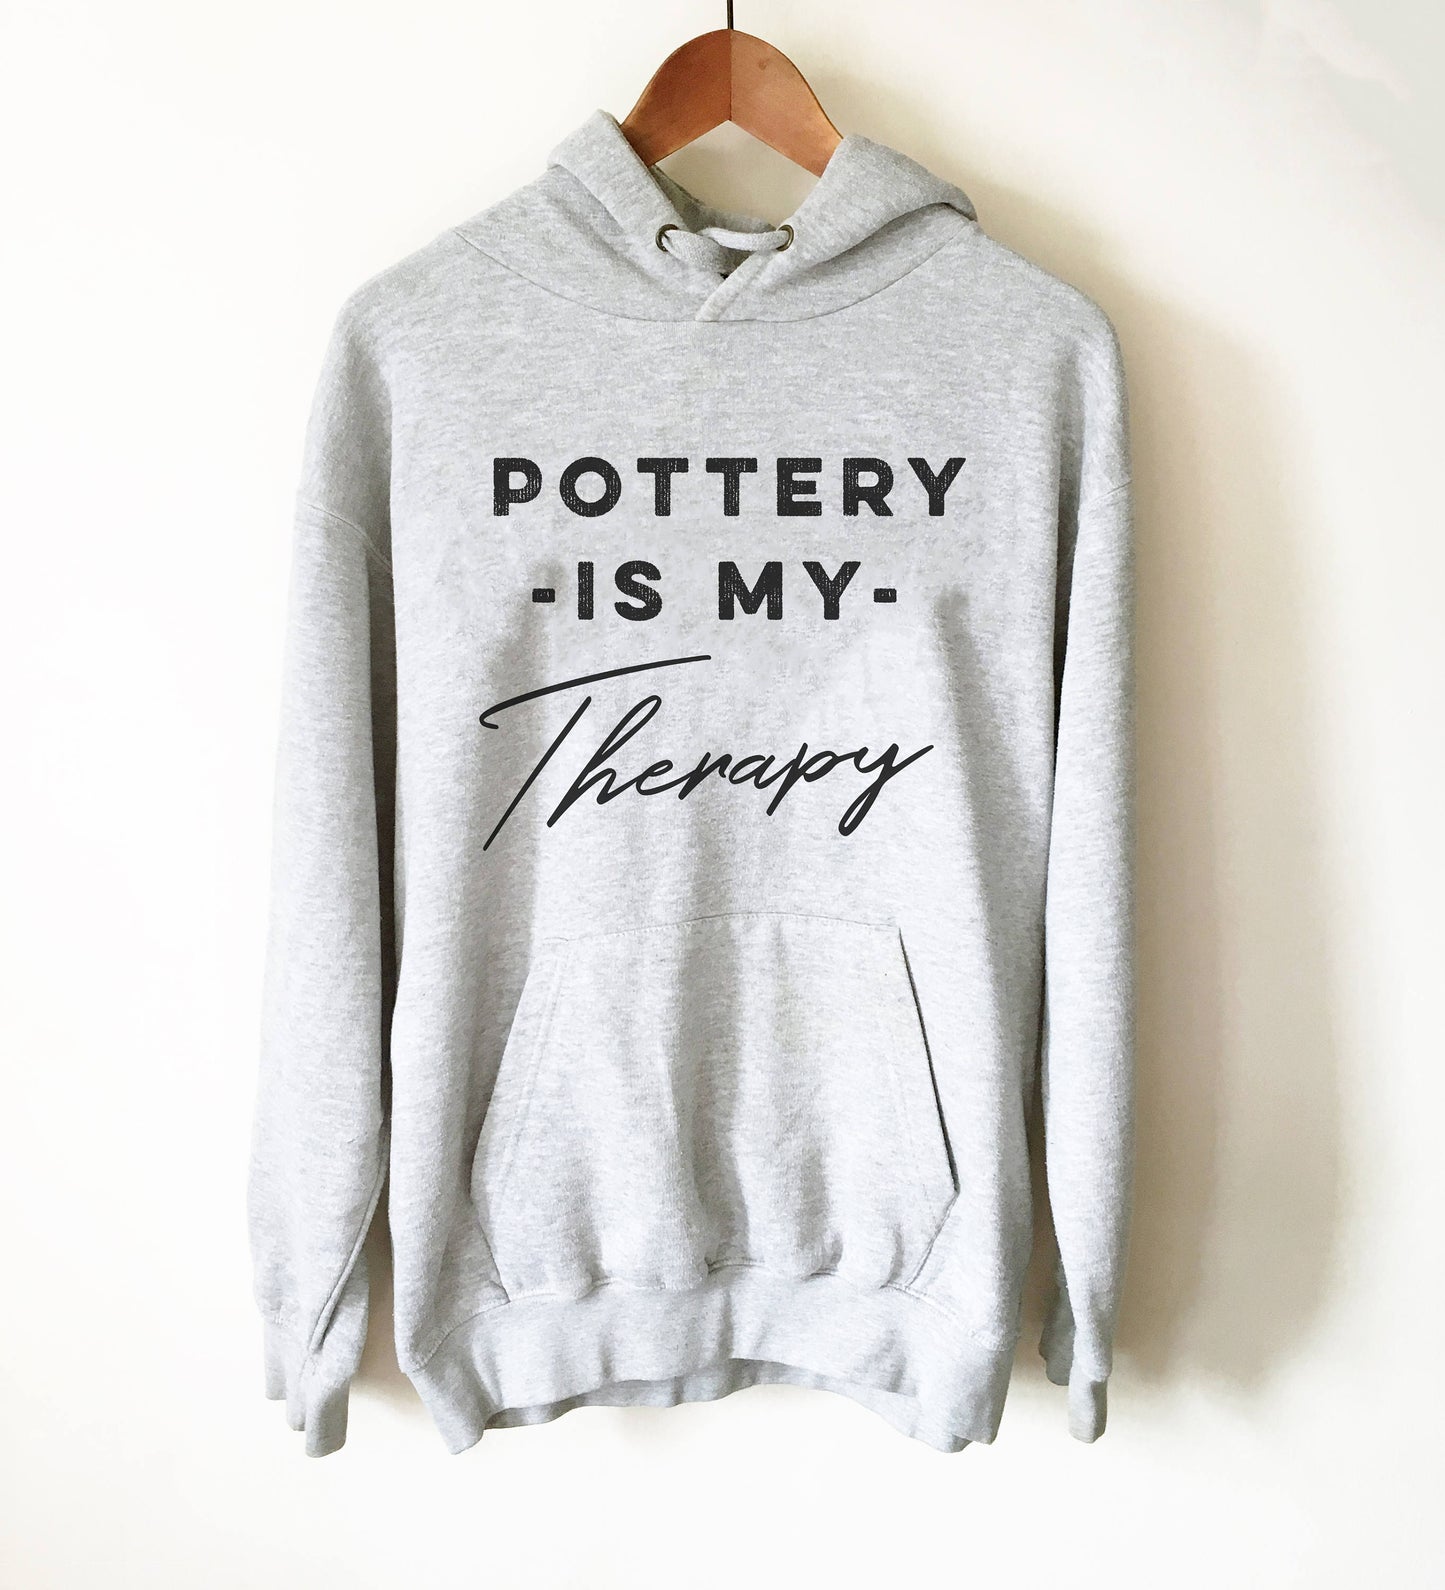 Pottery is my Therapy Hoodie - Pottery shirt | Pottery lover | Funny pottery shirt | Ceramics and pottery | Pottery gift